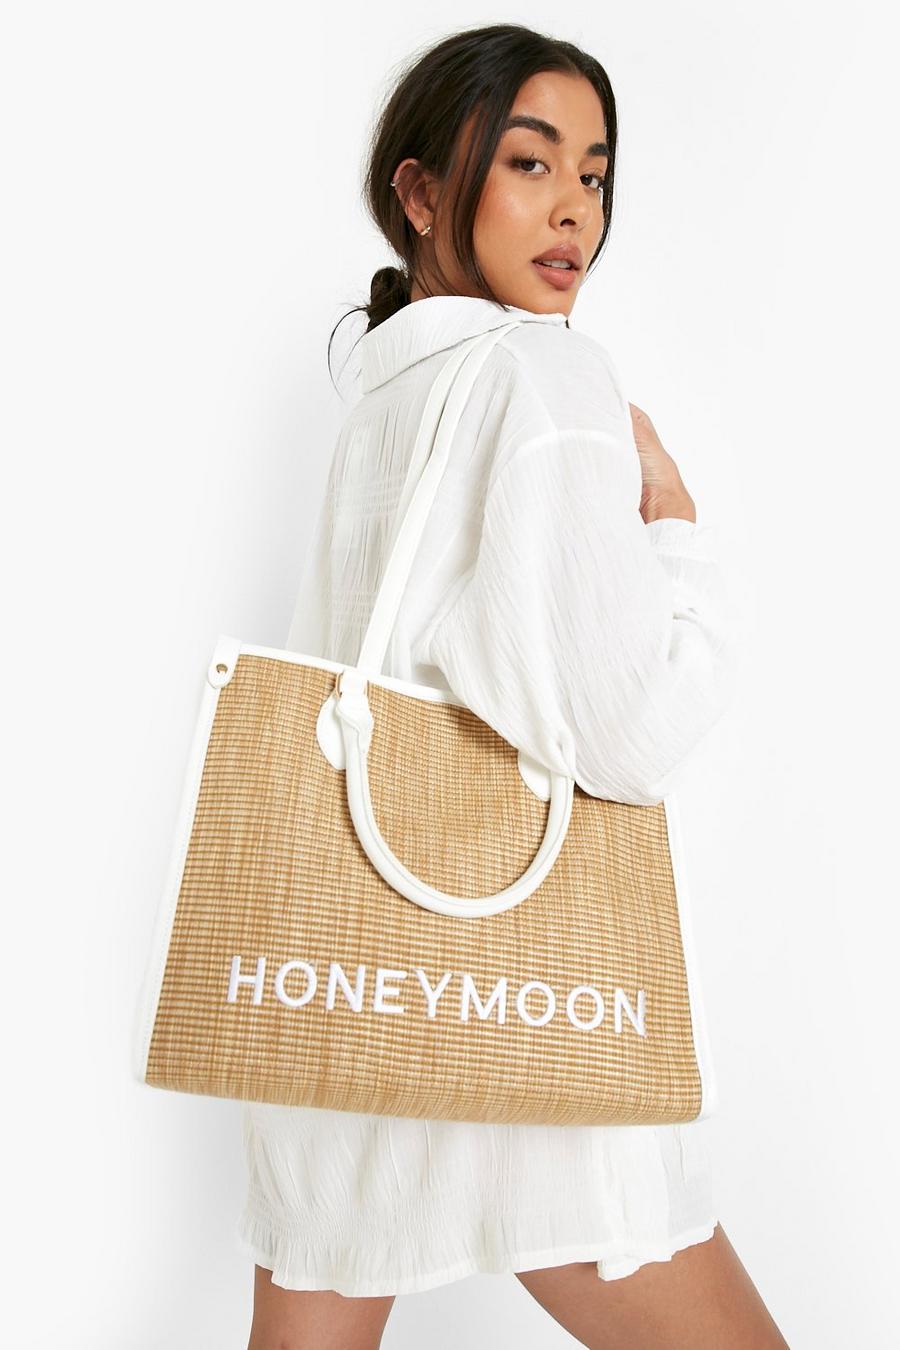 Boohoo Honeymoon Straw Beach Bag in White Womens Bags Makeup bags and cosmetic cases 